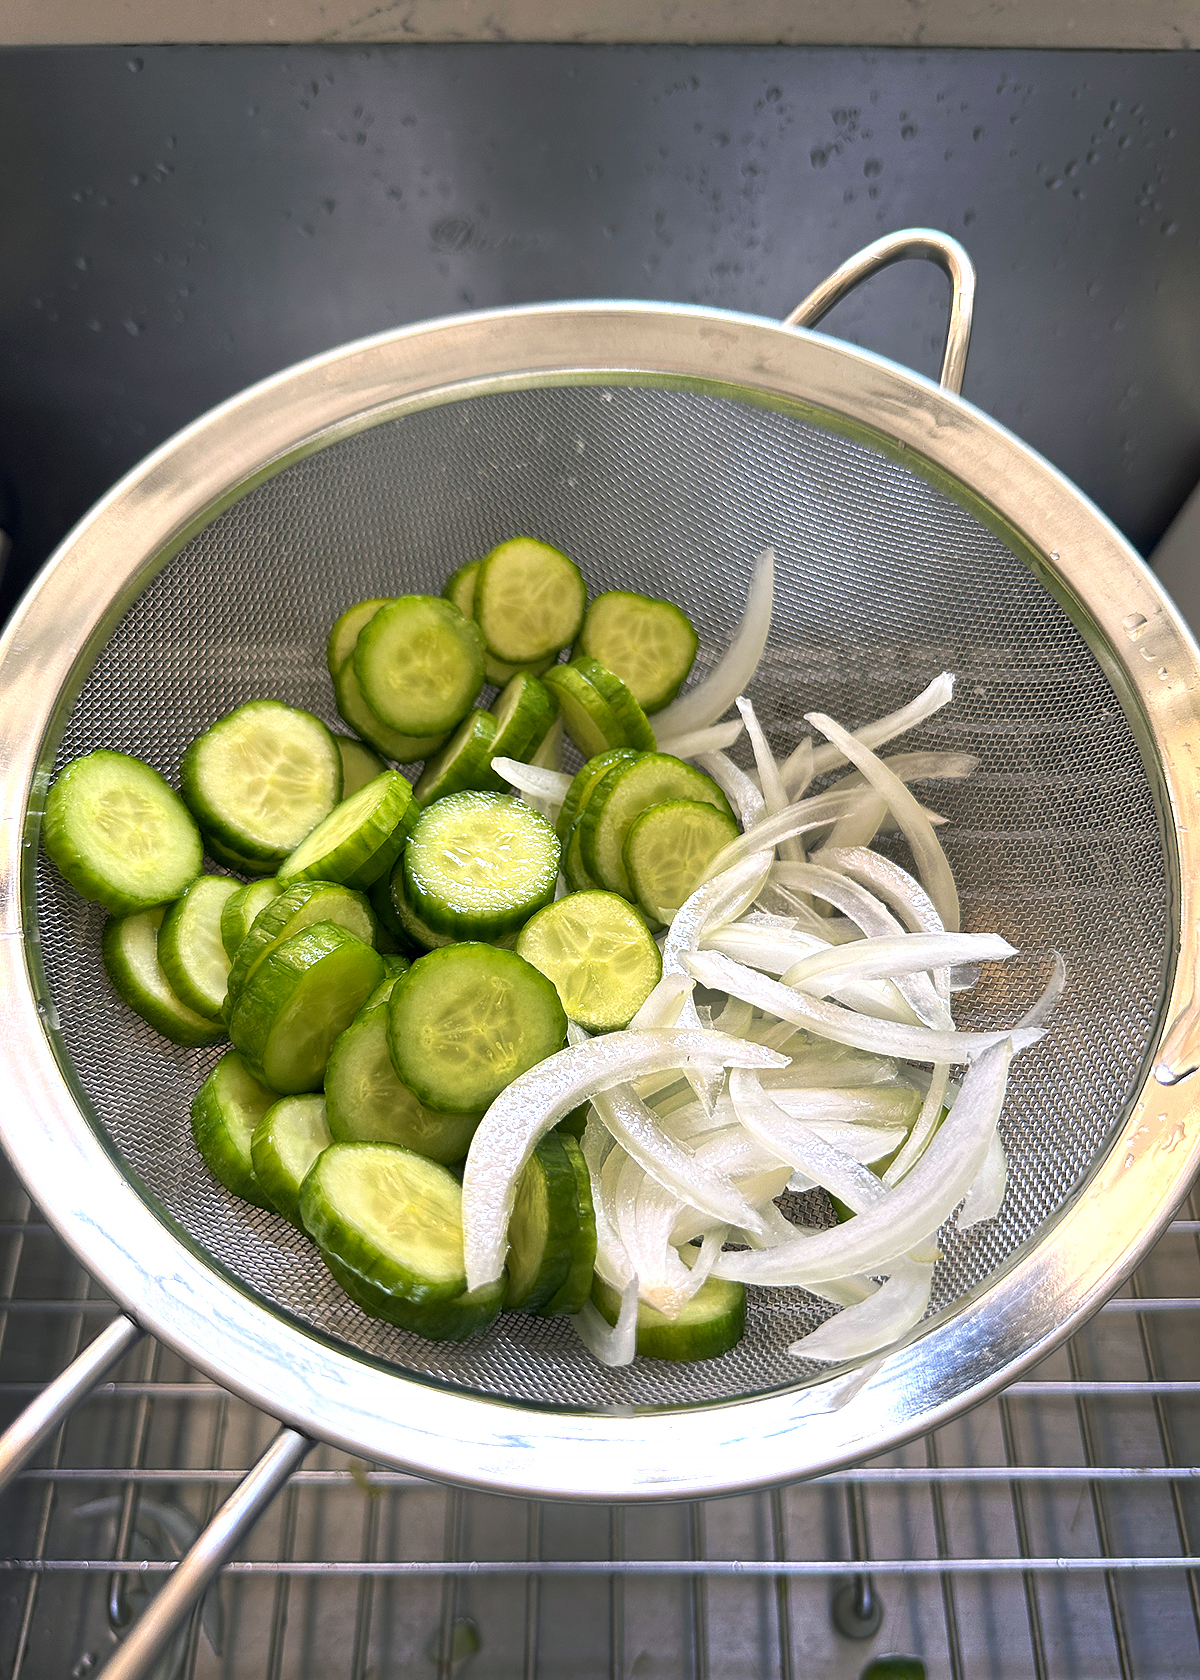 cucumbers and onions in sieve over sink, rinsed and drained